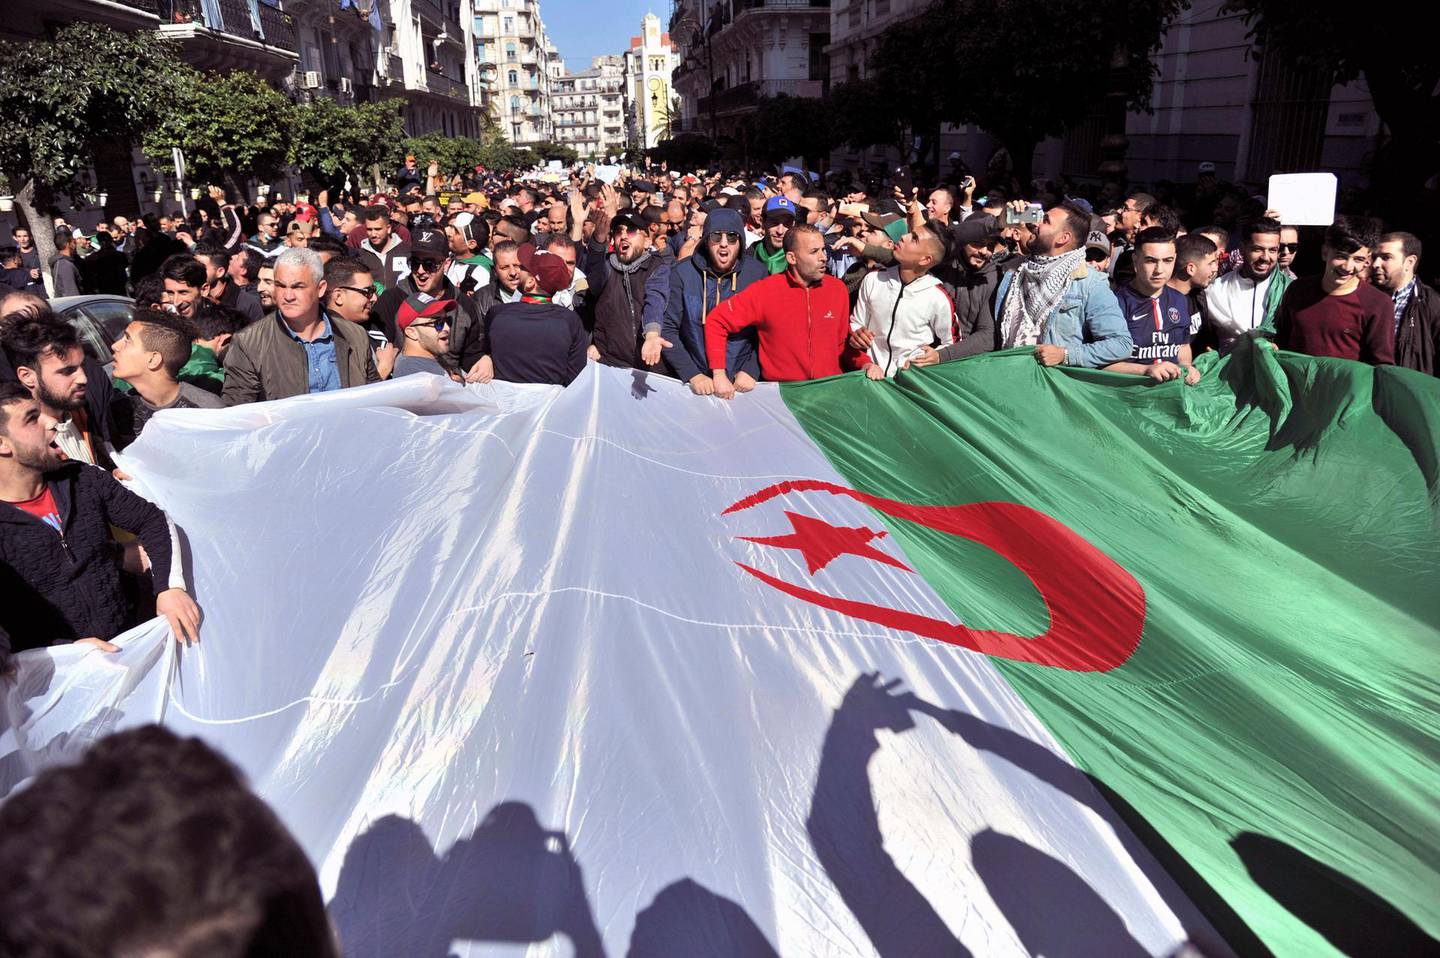 Protesters demonstrate in the streets of Algiers, Algeria, to denounce President Abdelaziz Bouteflika's bid for a fifth term, Friday, March 1, 2019. Tens of thousands of protesters marched through Algeria's capital Friday against ailing President Abdelaziz Bouteflika's bid for a fifth term, surging past a barricade and defying repeated volleys of tear gas fired by police during the tense demonstration. Banner in Arabic reads "No to the fifth mandate". (AP Photo/Slimane Zohir)